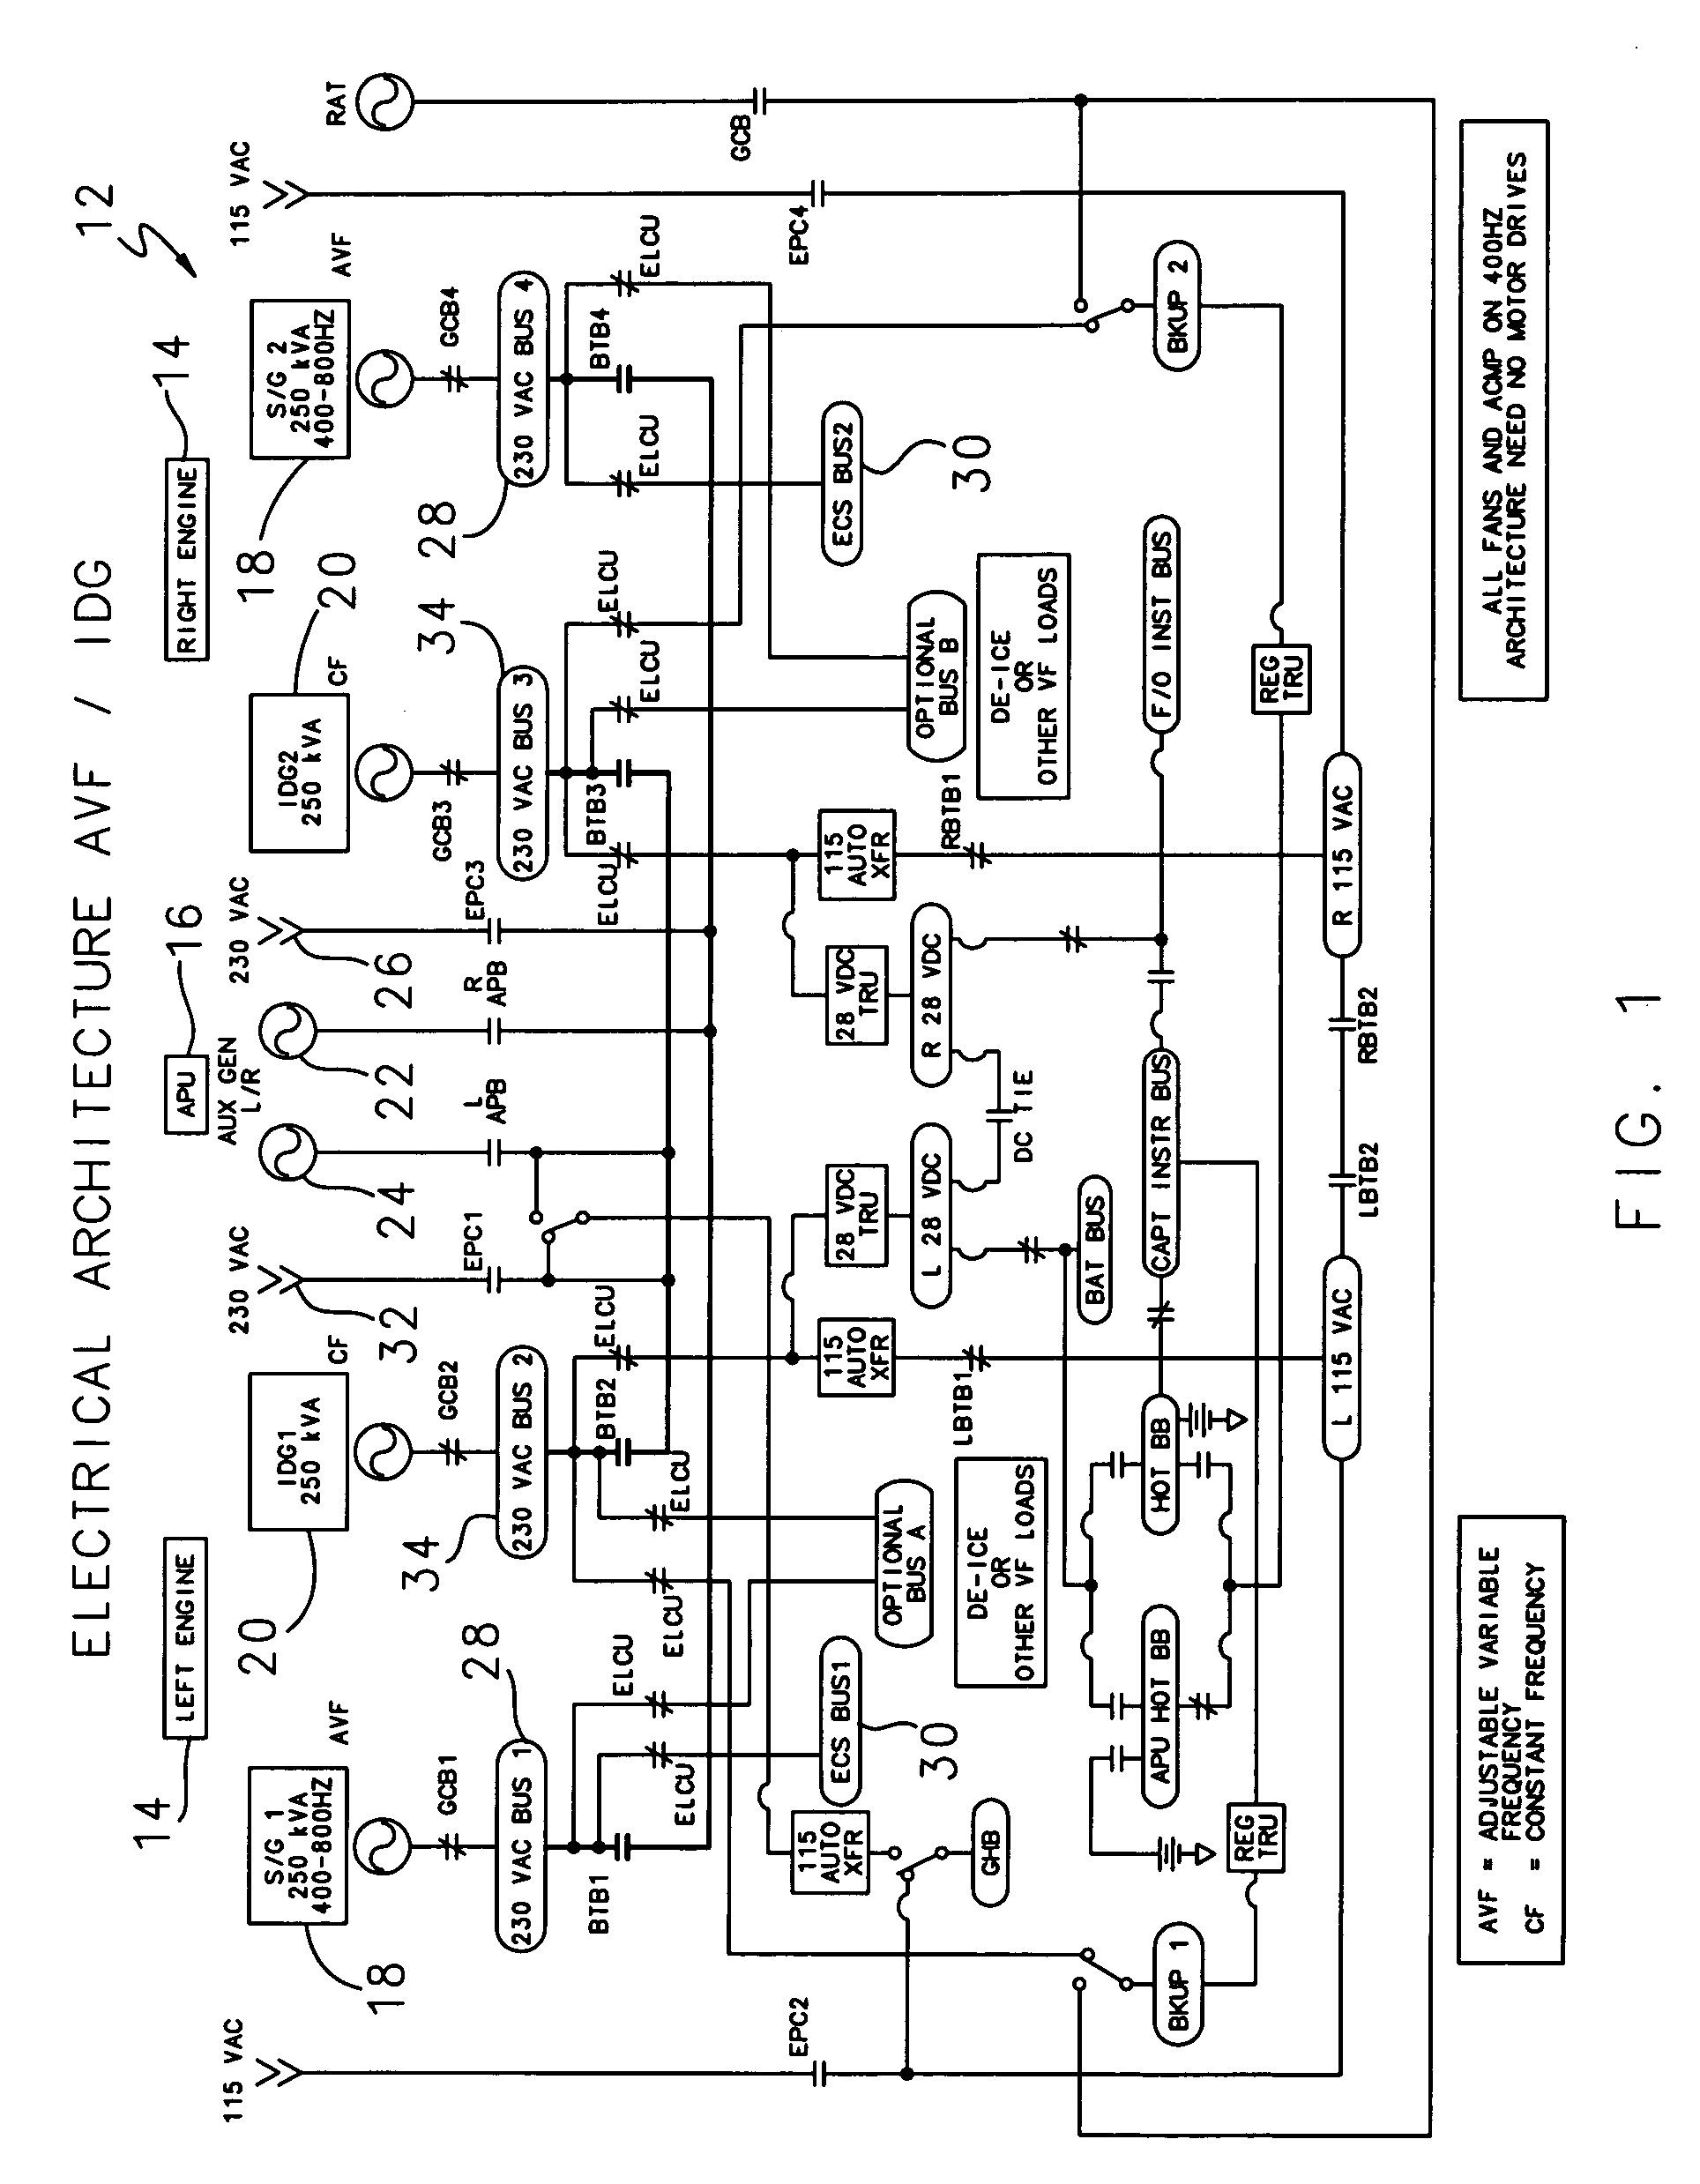 Aircraft starter/generator electrical system with mixed power architecture